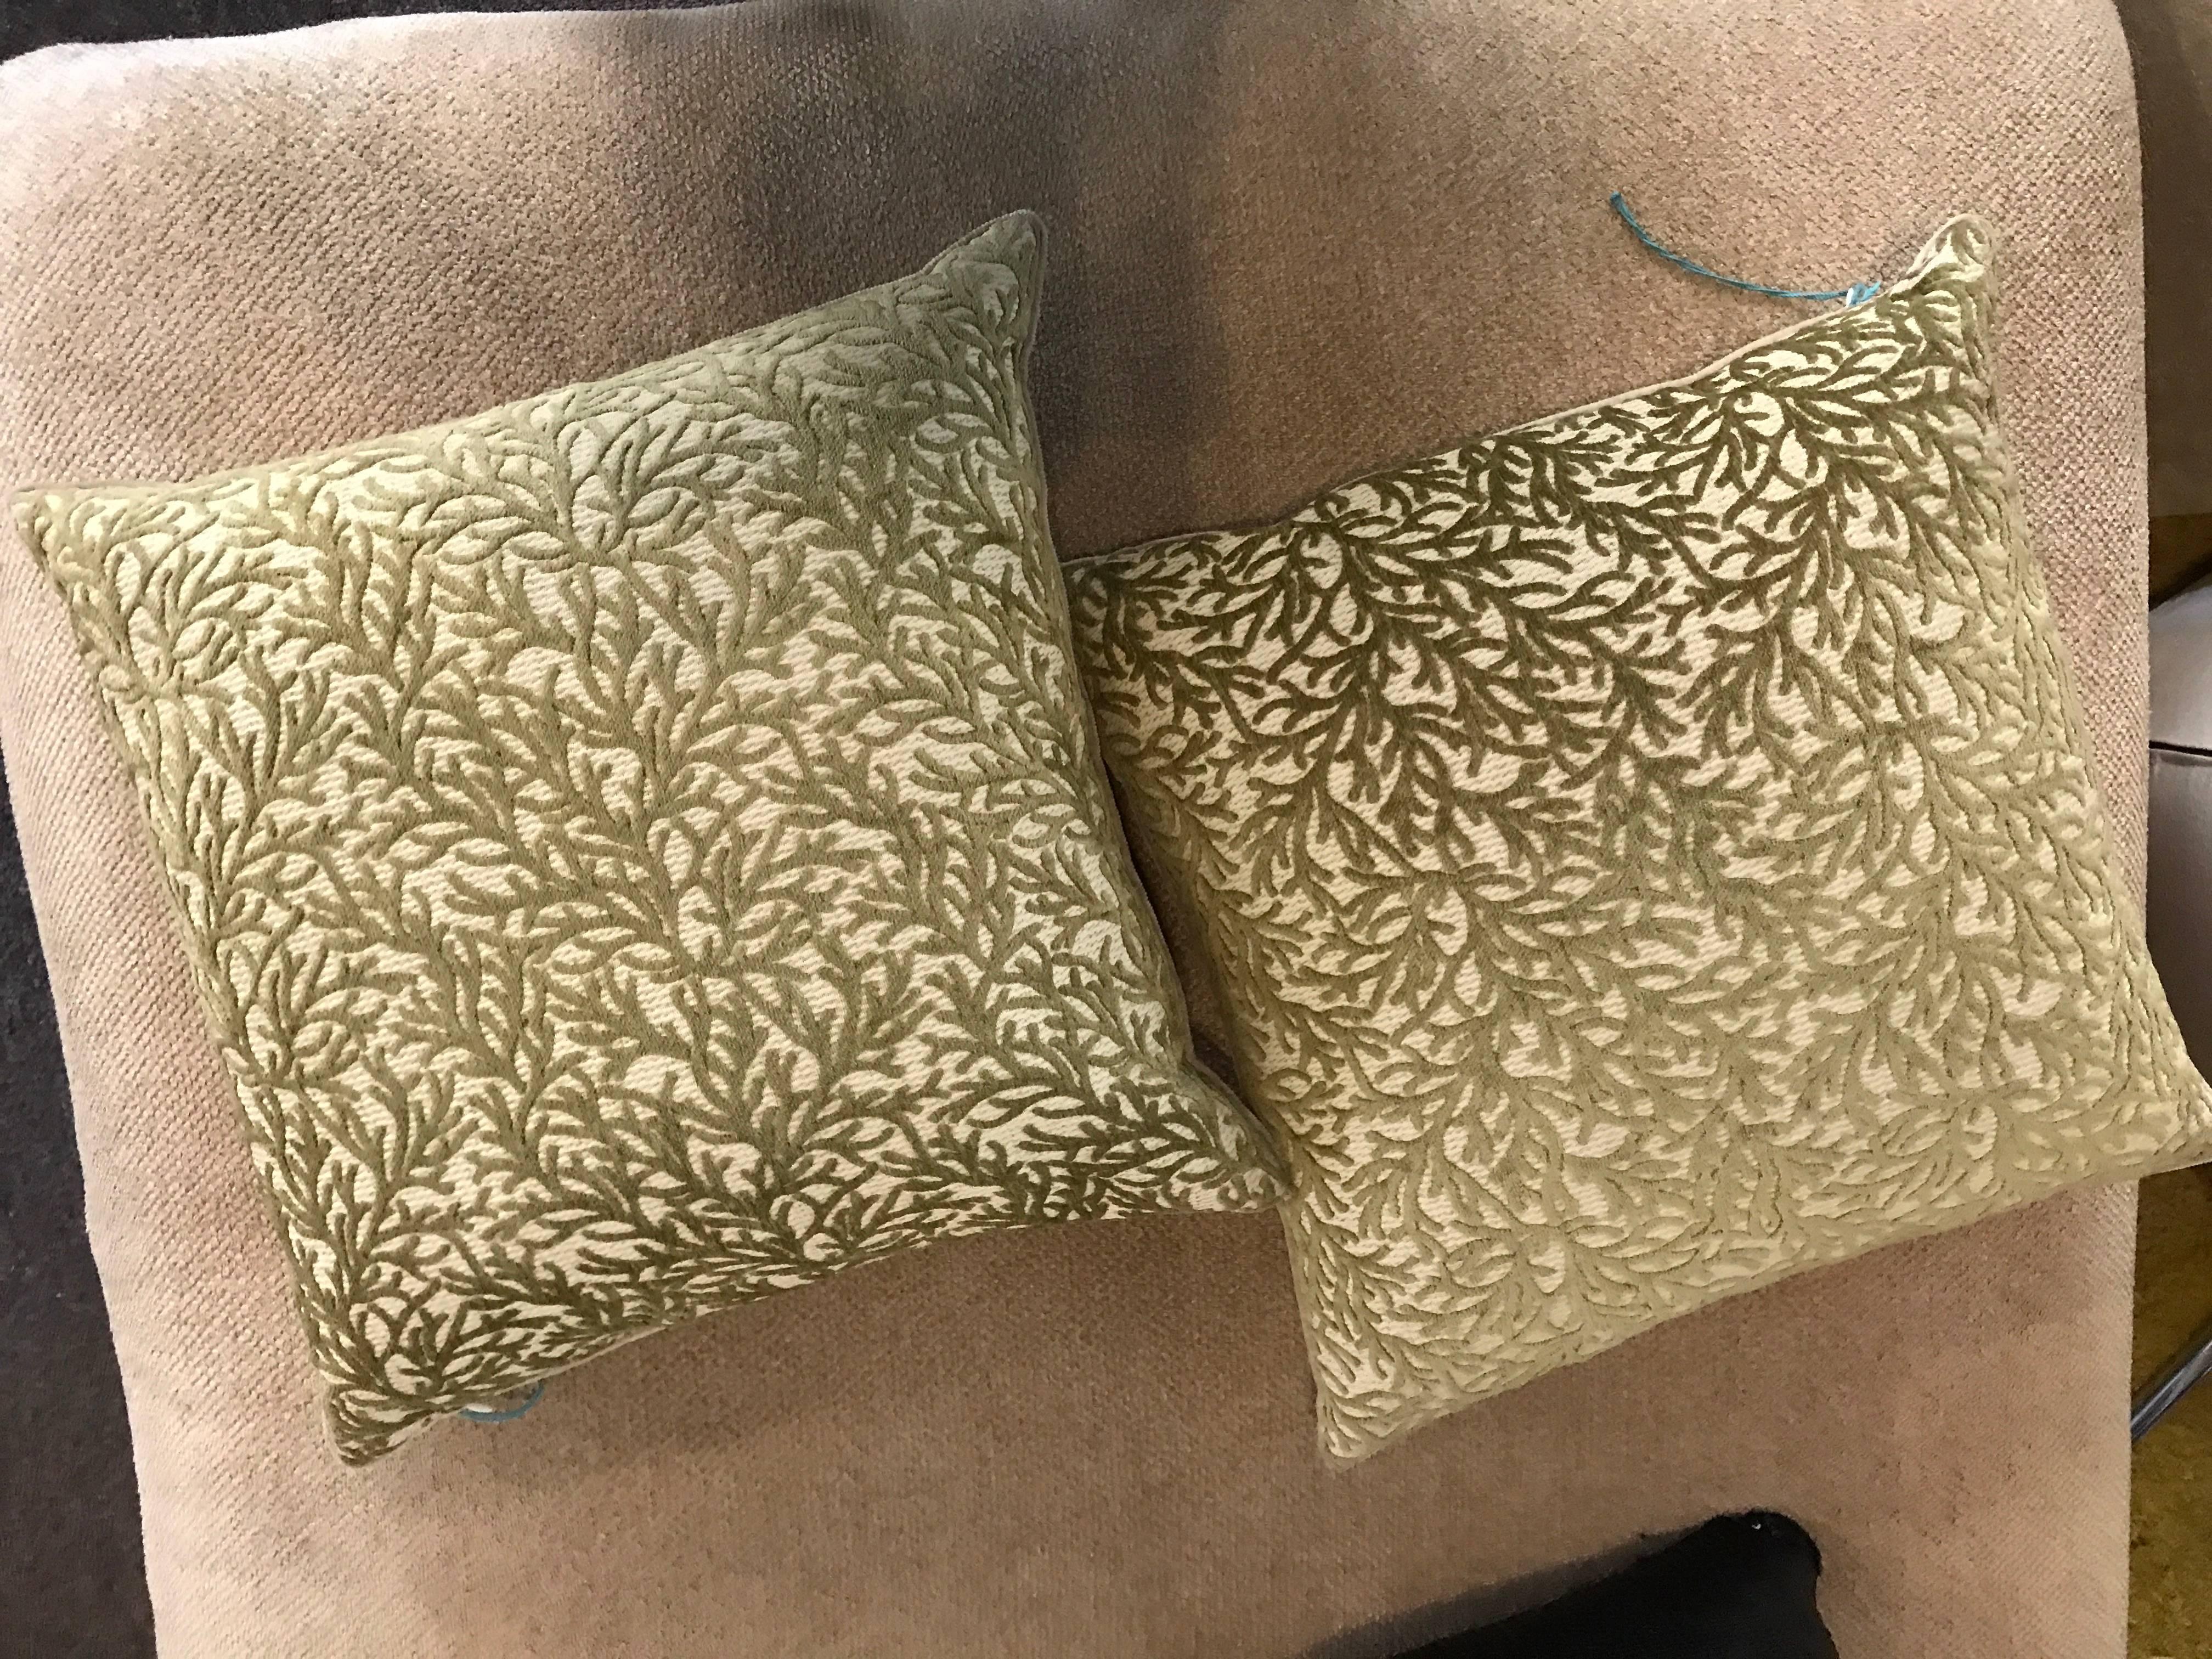  Pair of Sage Coral Cut Velvet Modern Design Throw Pillows In Excellent Condition For Sale In Palm Springs, CA